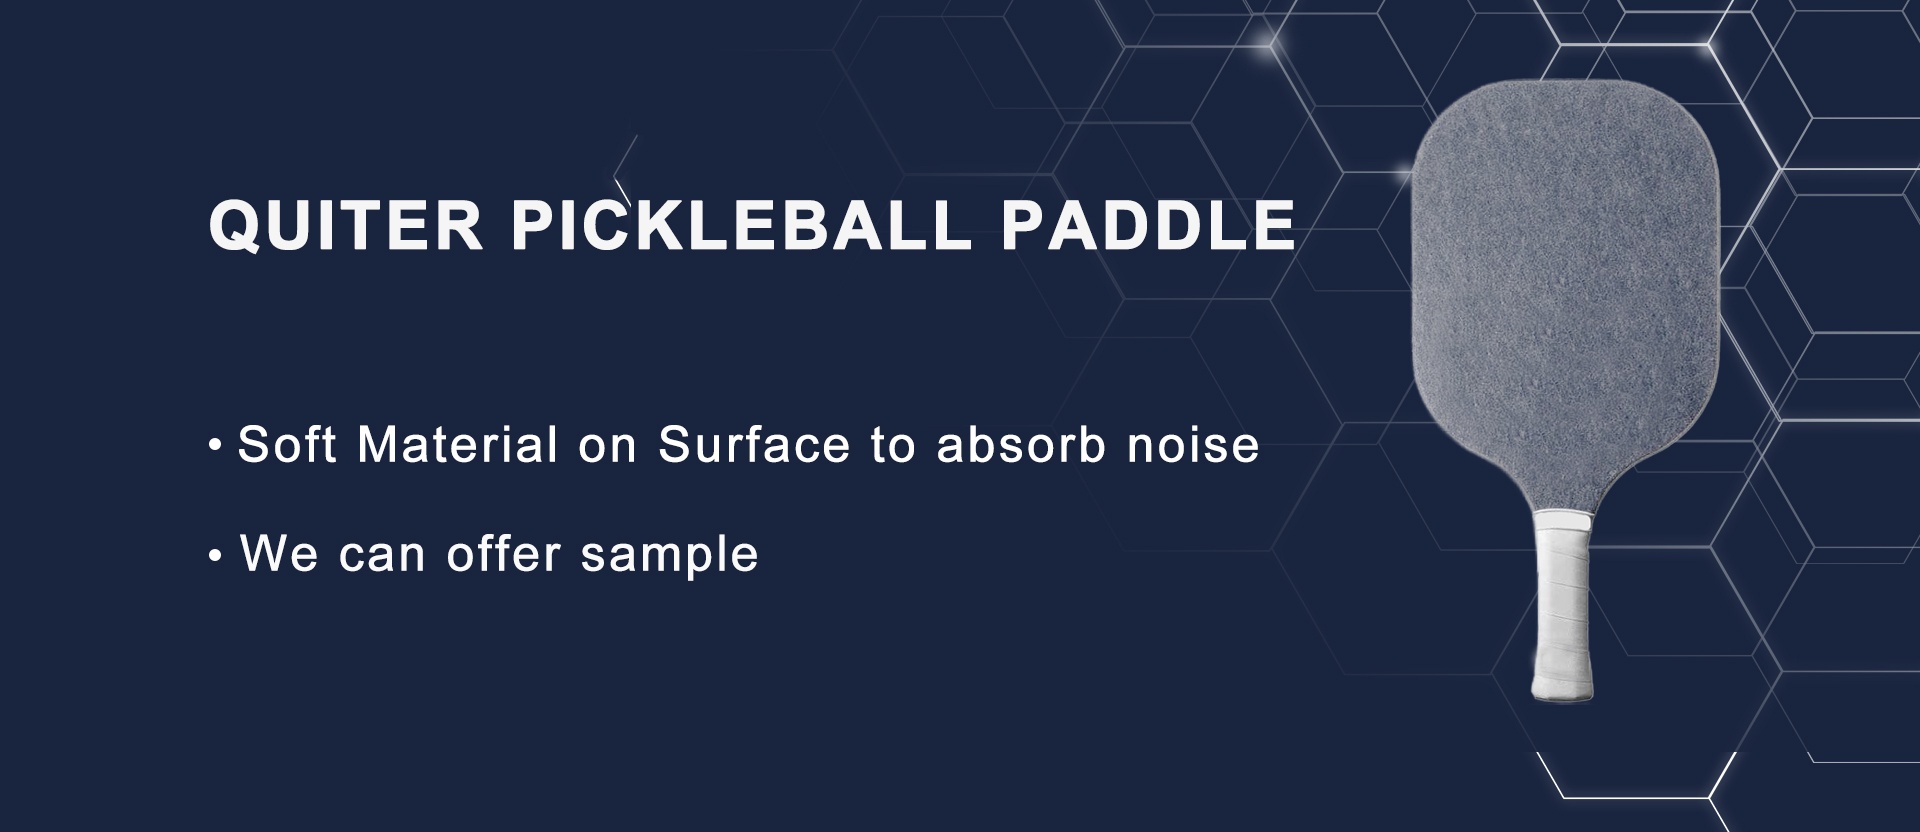 pickleball paddle manufacturers